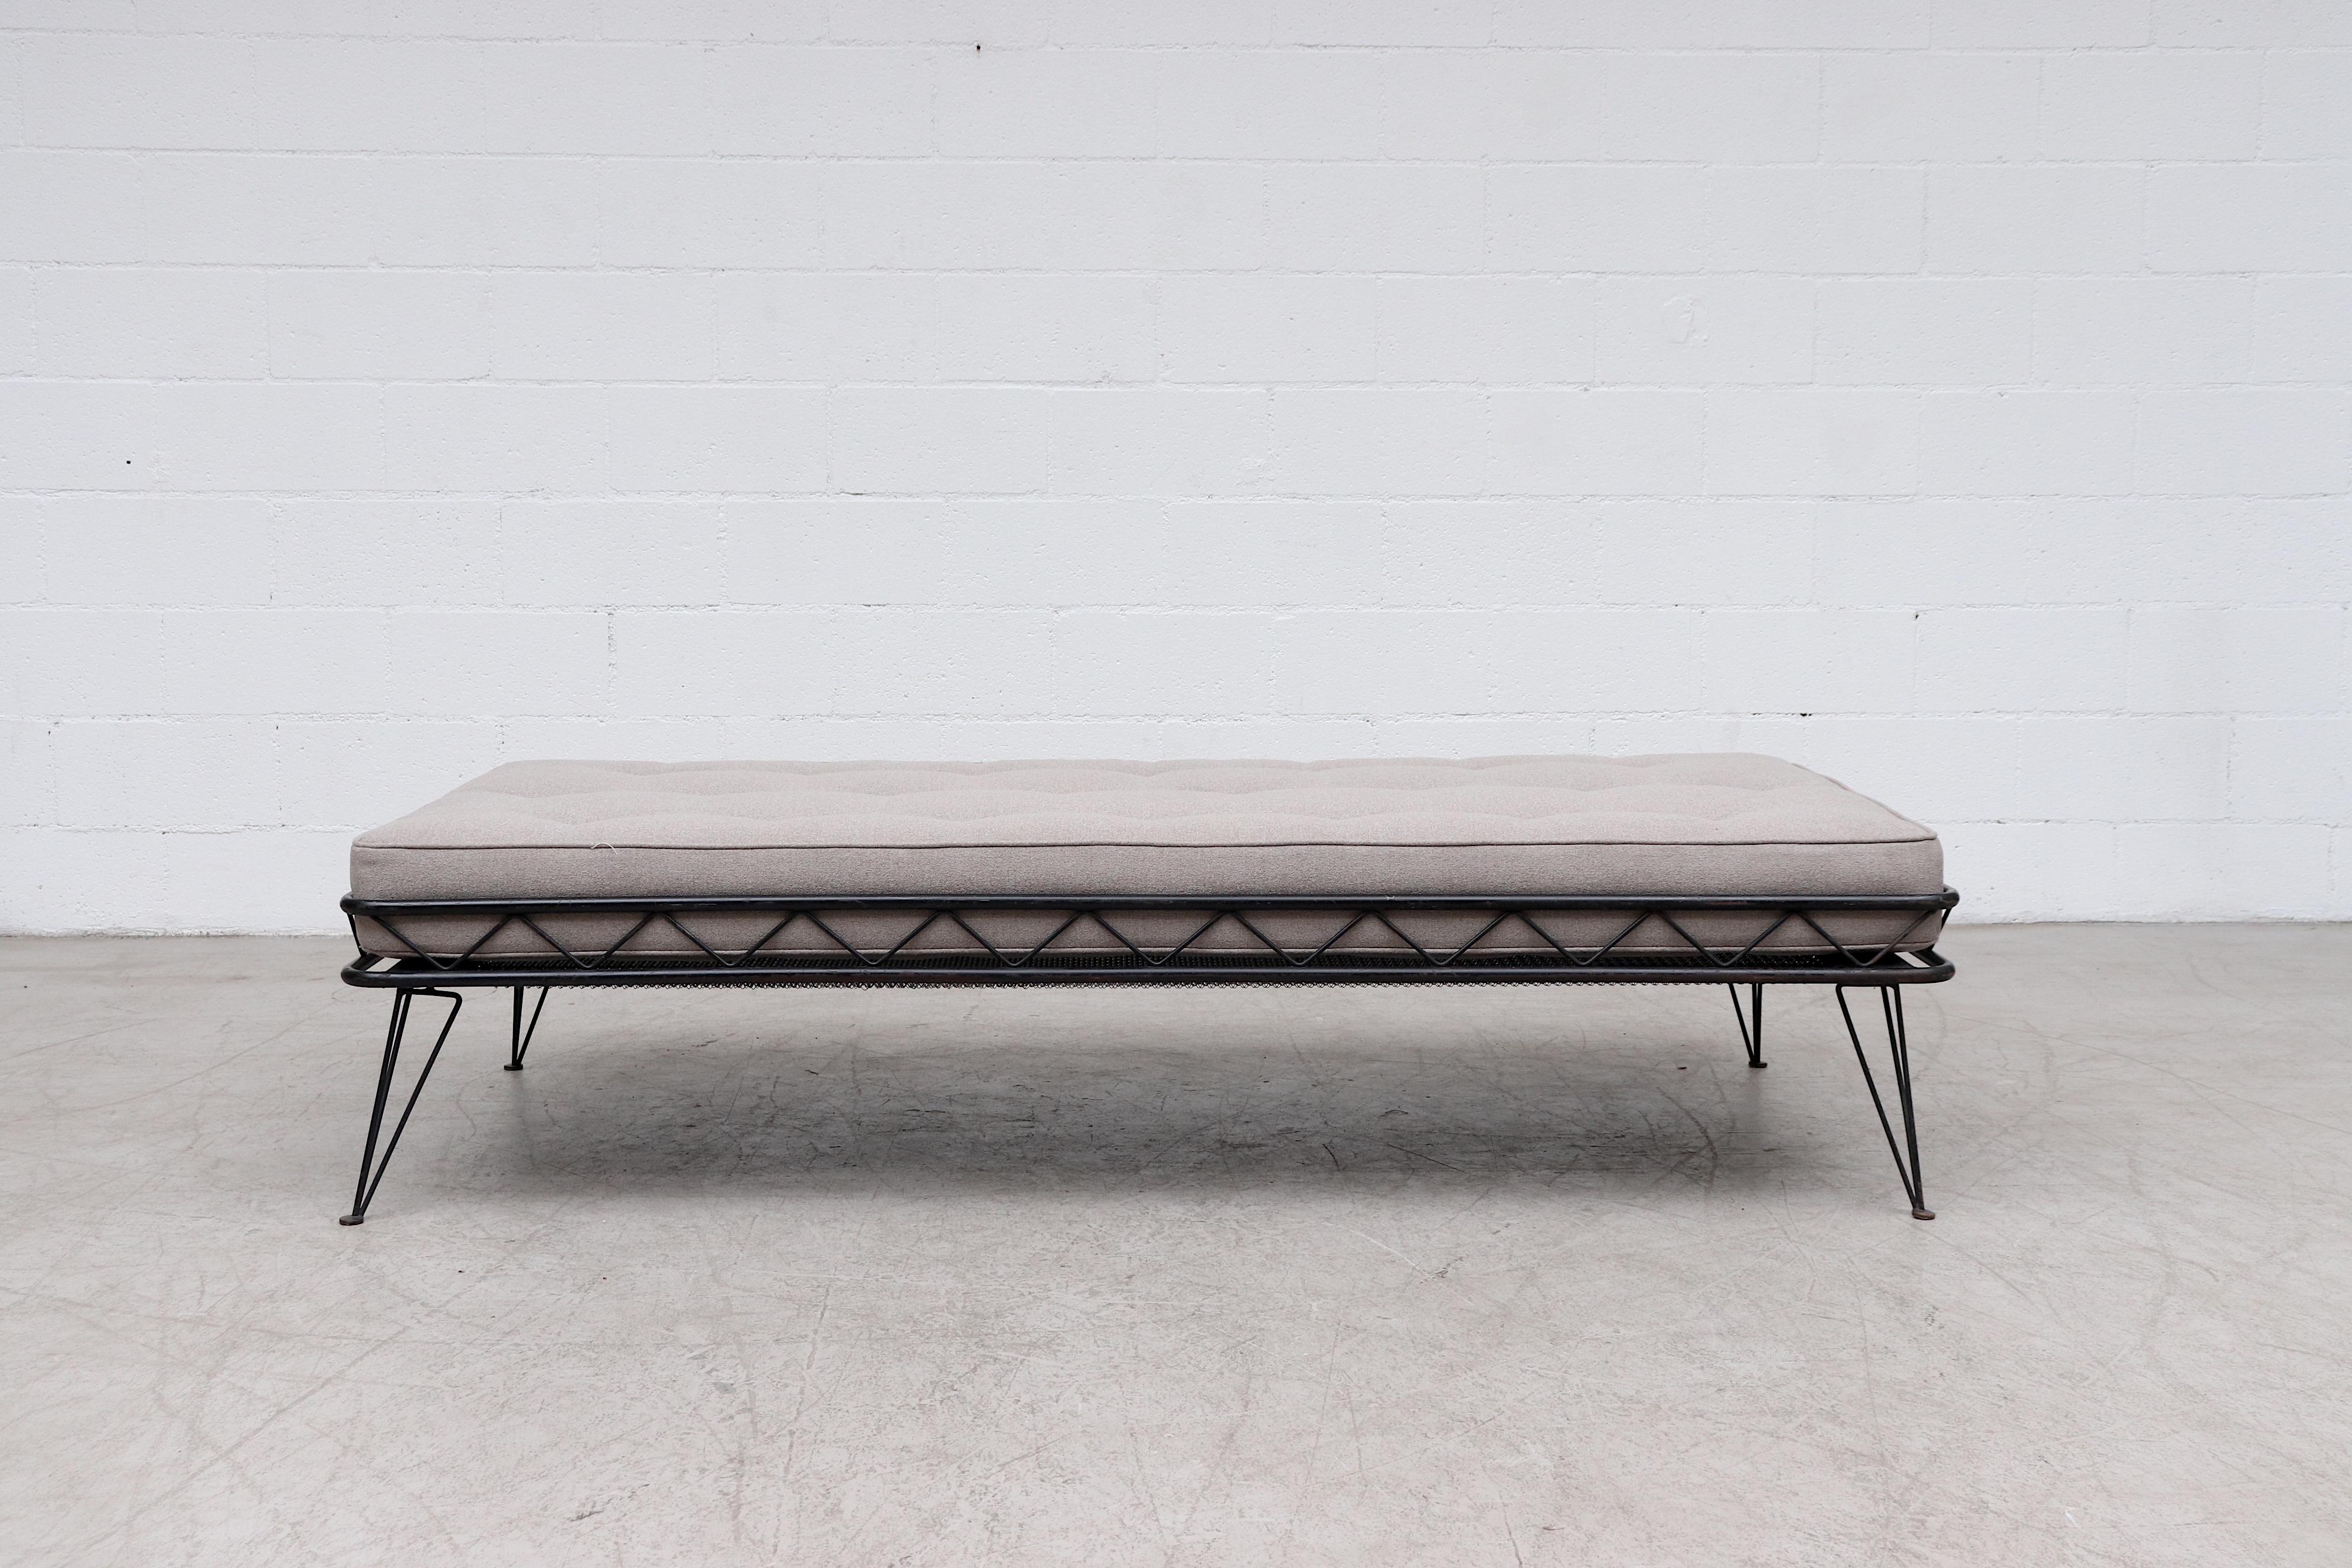 Rare Wim Rietveld Arielle daybed for Auping, 1953. Architectural black enameled metal frame with newly made tufted grey mattress. Frame in original condition with lovely patina and original Auping name on the mesh screen. Wear is consistent with its